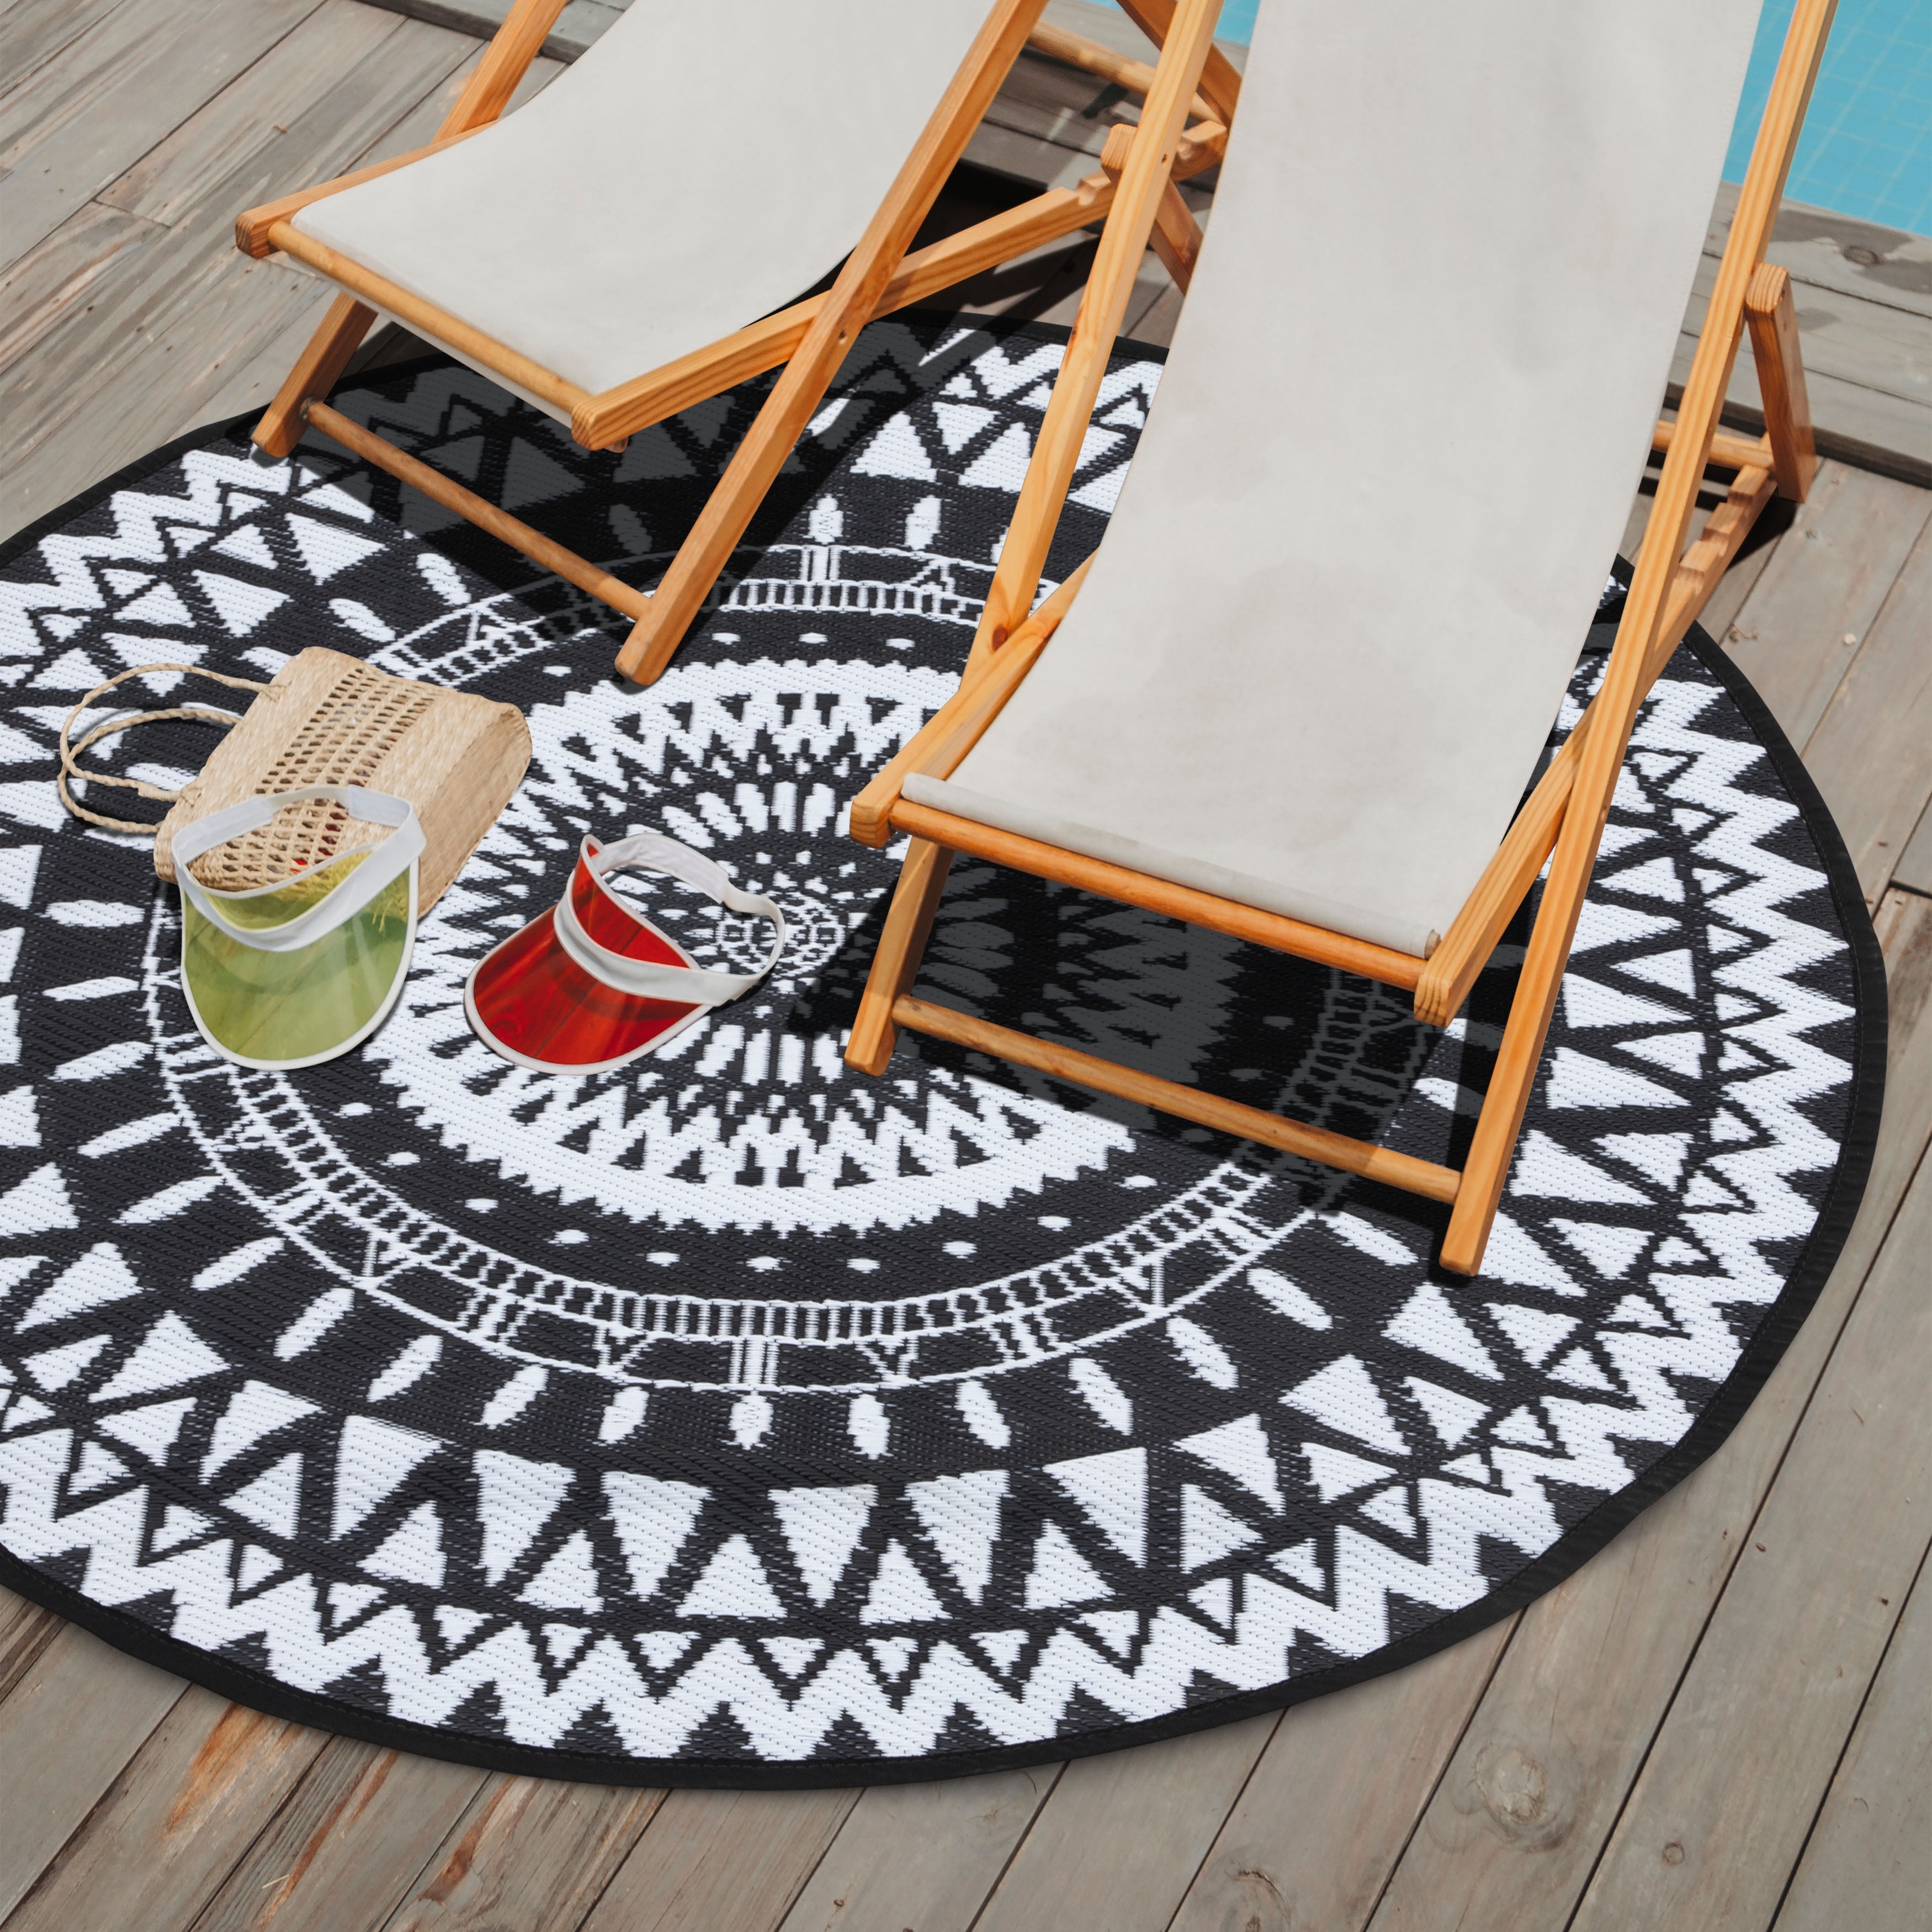 GENIMO Large Outdoor Rugs 9x18, Waterproof Camping Rug, for Patio